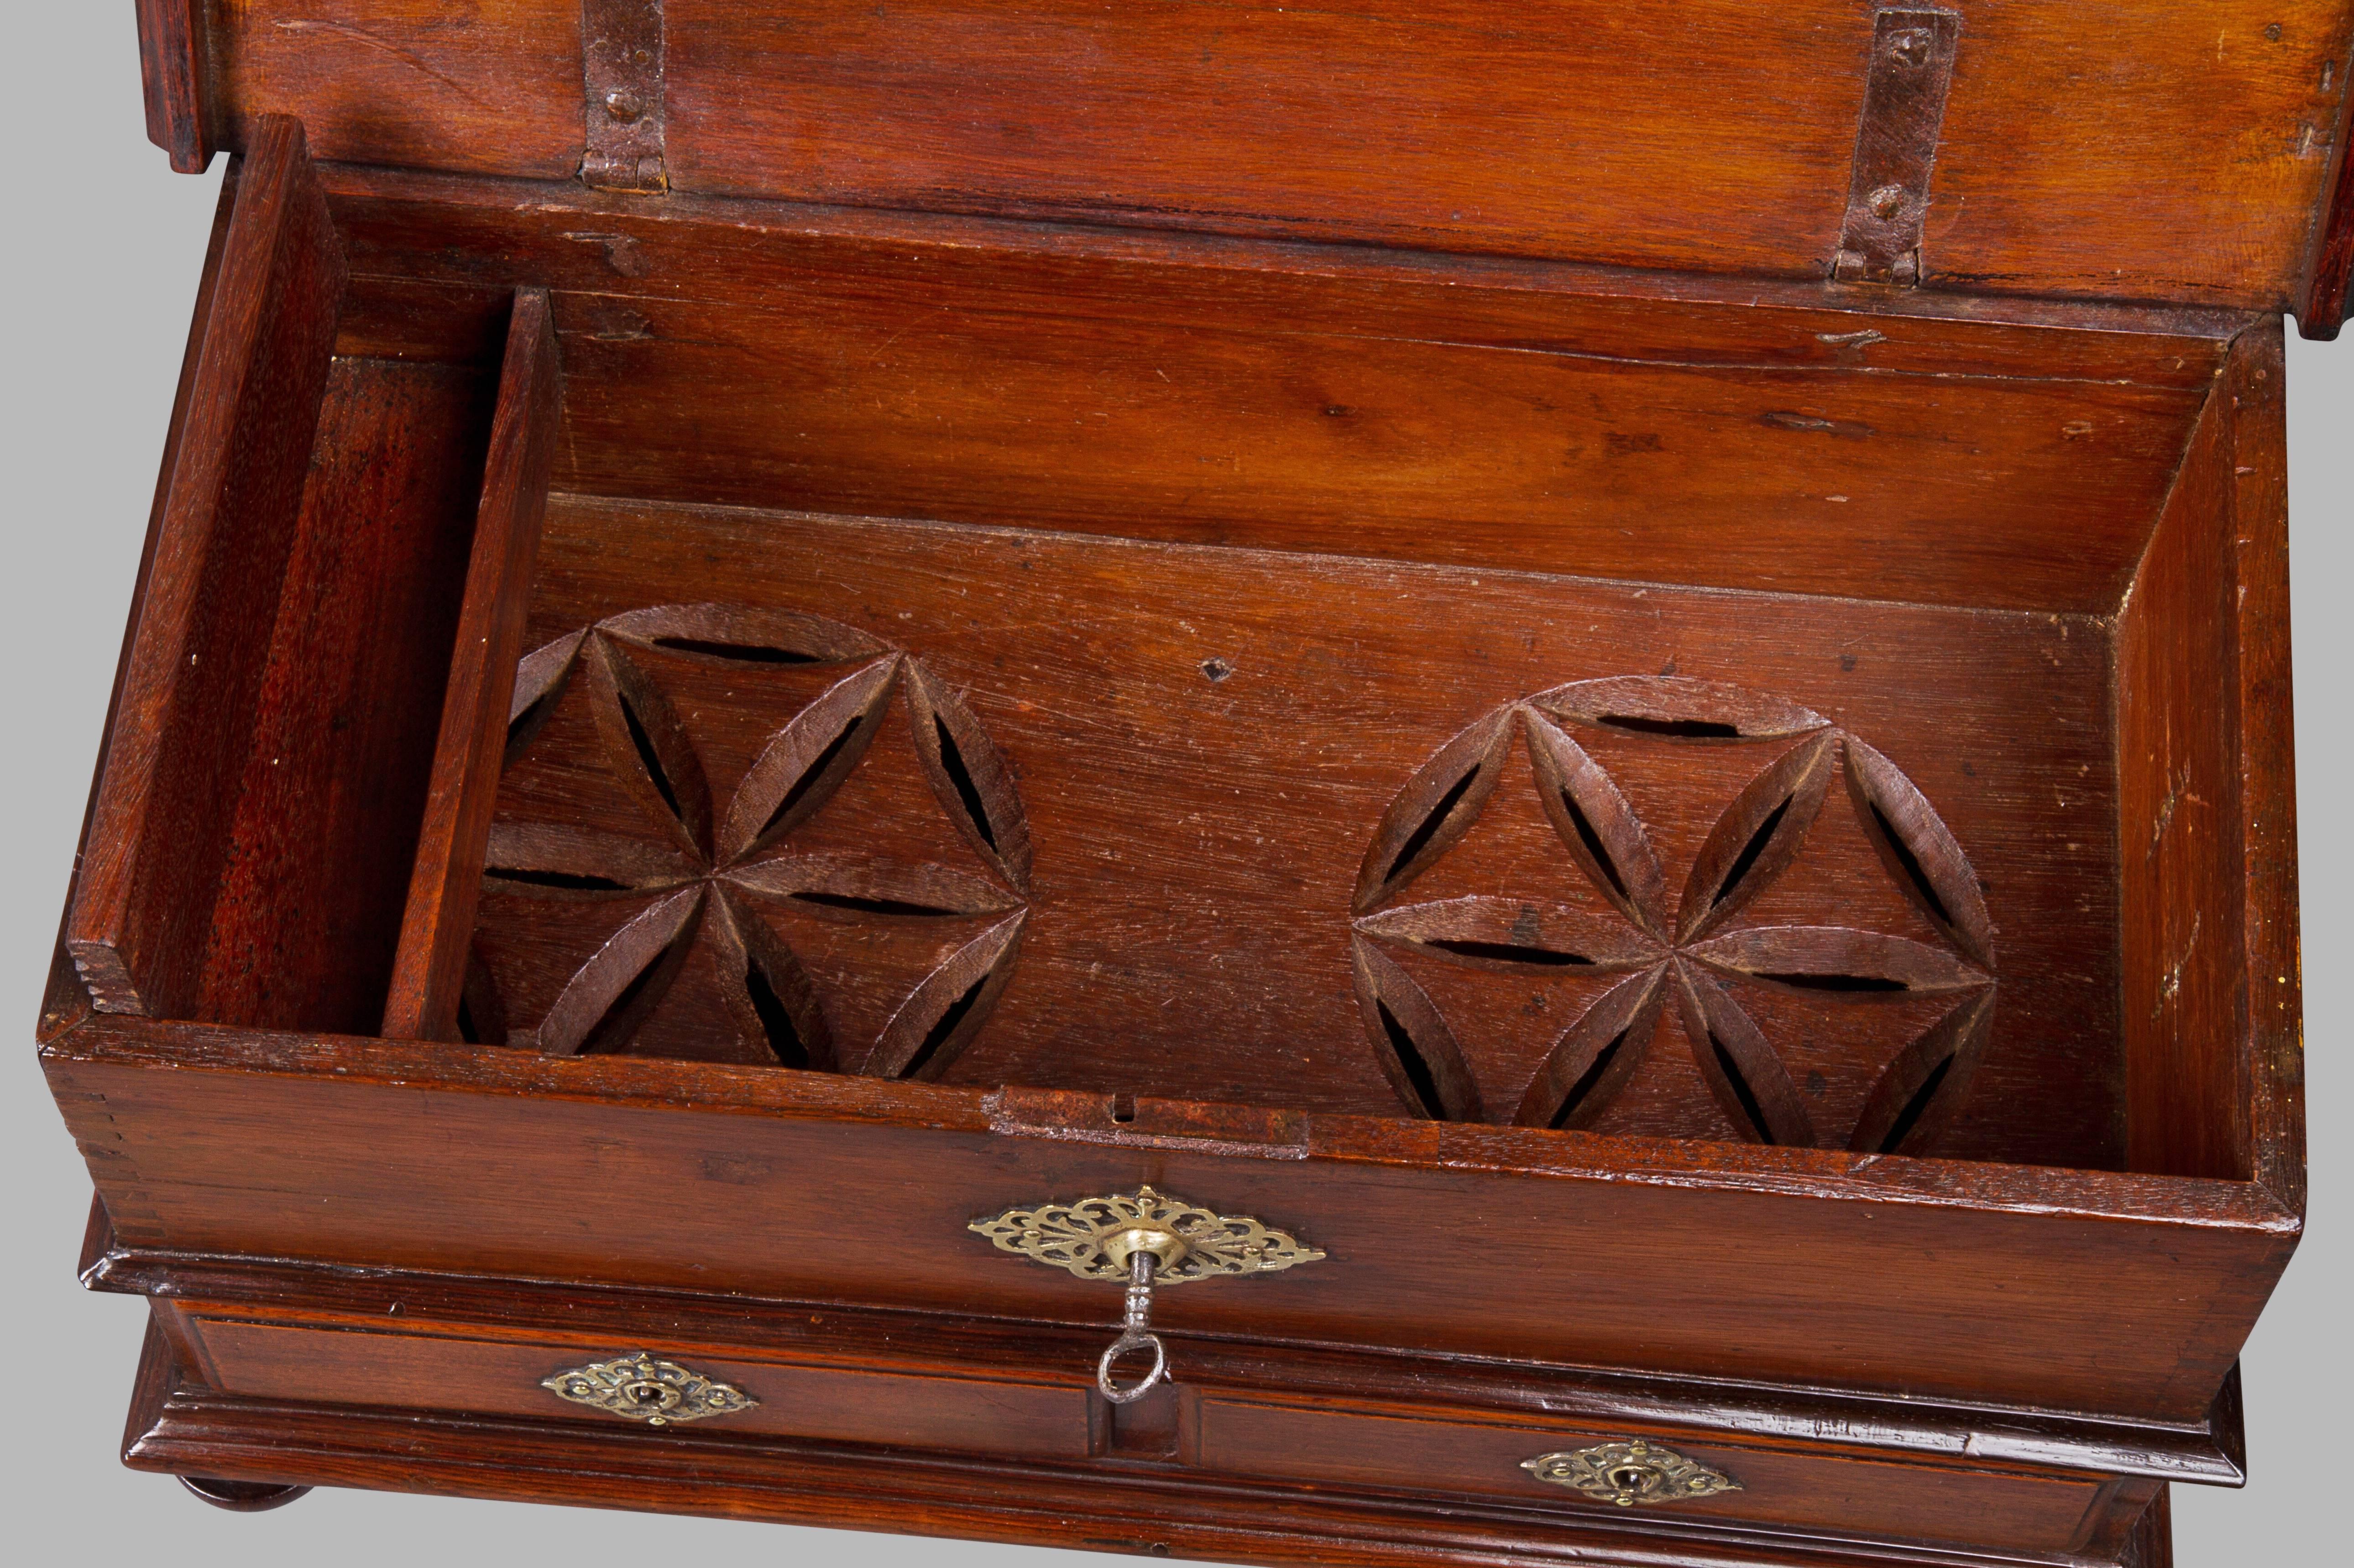 In mahogany and goncalo alves with original brass mounts, handles and lock. The interior of the chest retains the till and has the unusual feature of decorative vents to the floor to enable air circulation. An identical but full size example was